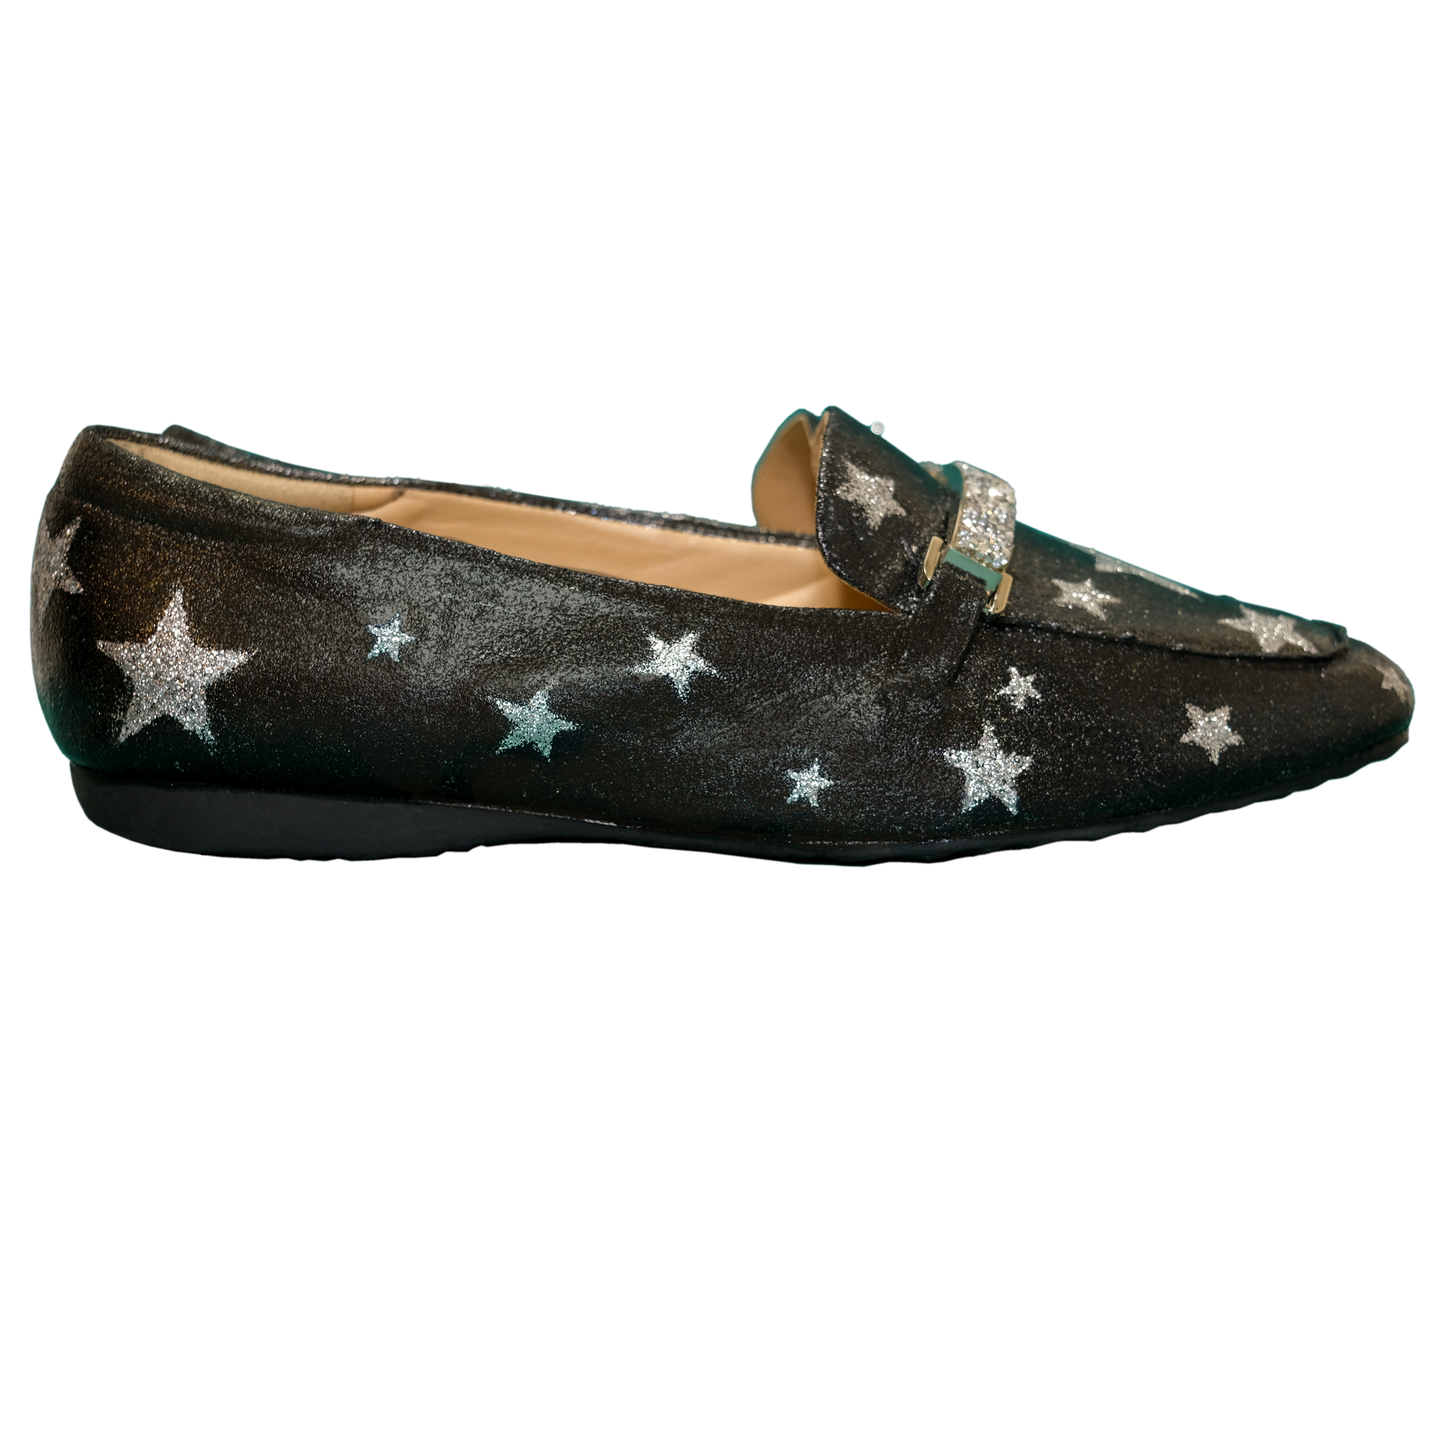 Glitter Star - Up-cycled Karl Lagerfeld Loafers - Size 9 -  Hand Painted by Skye De La Rosa